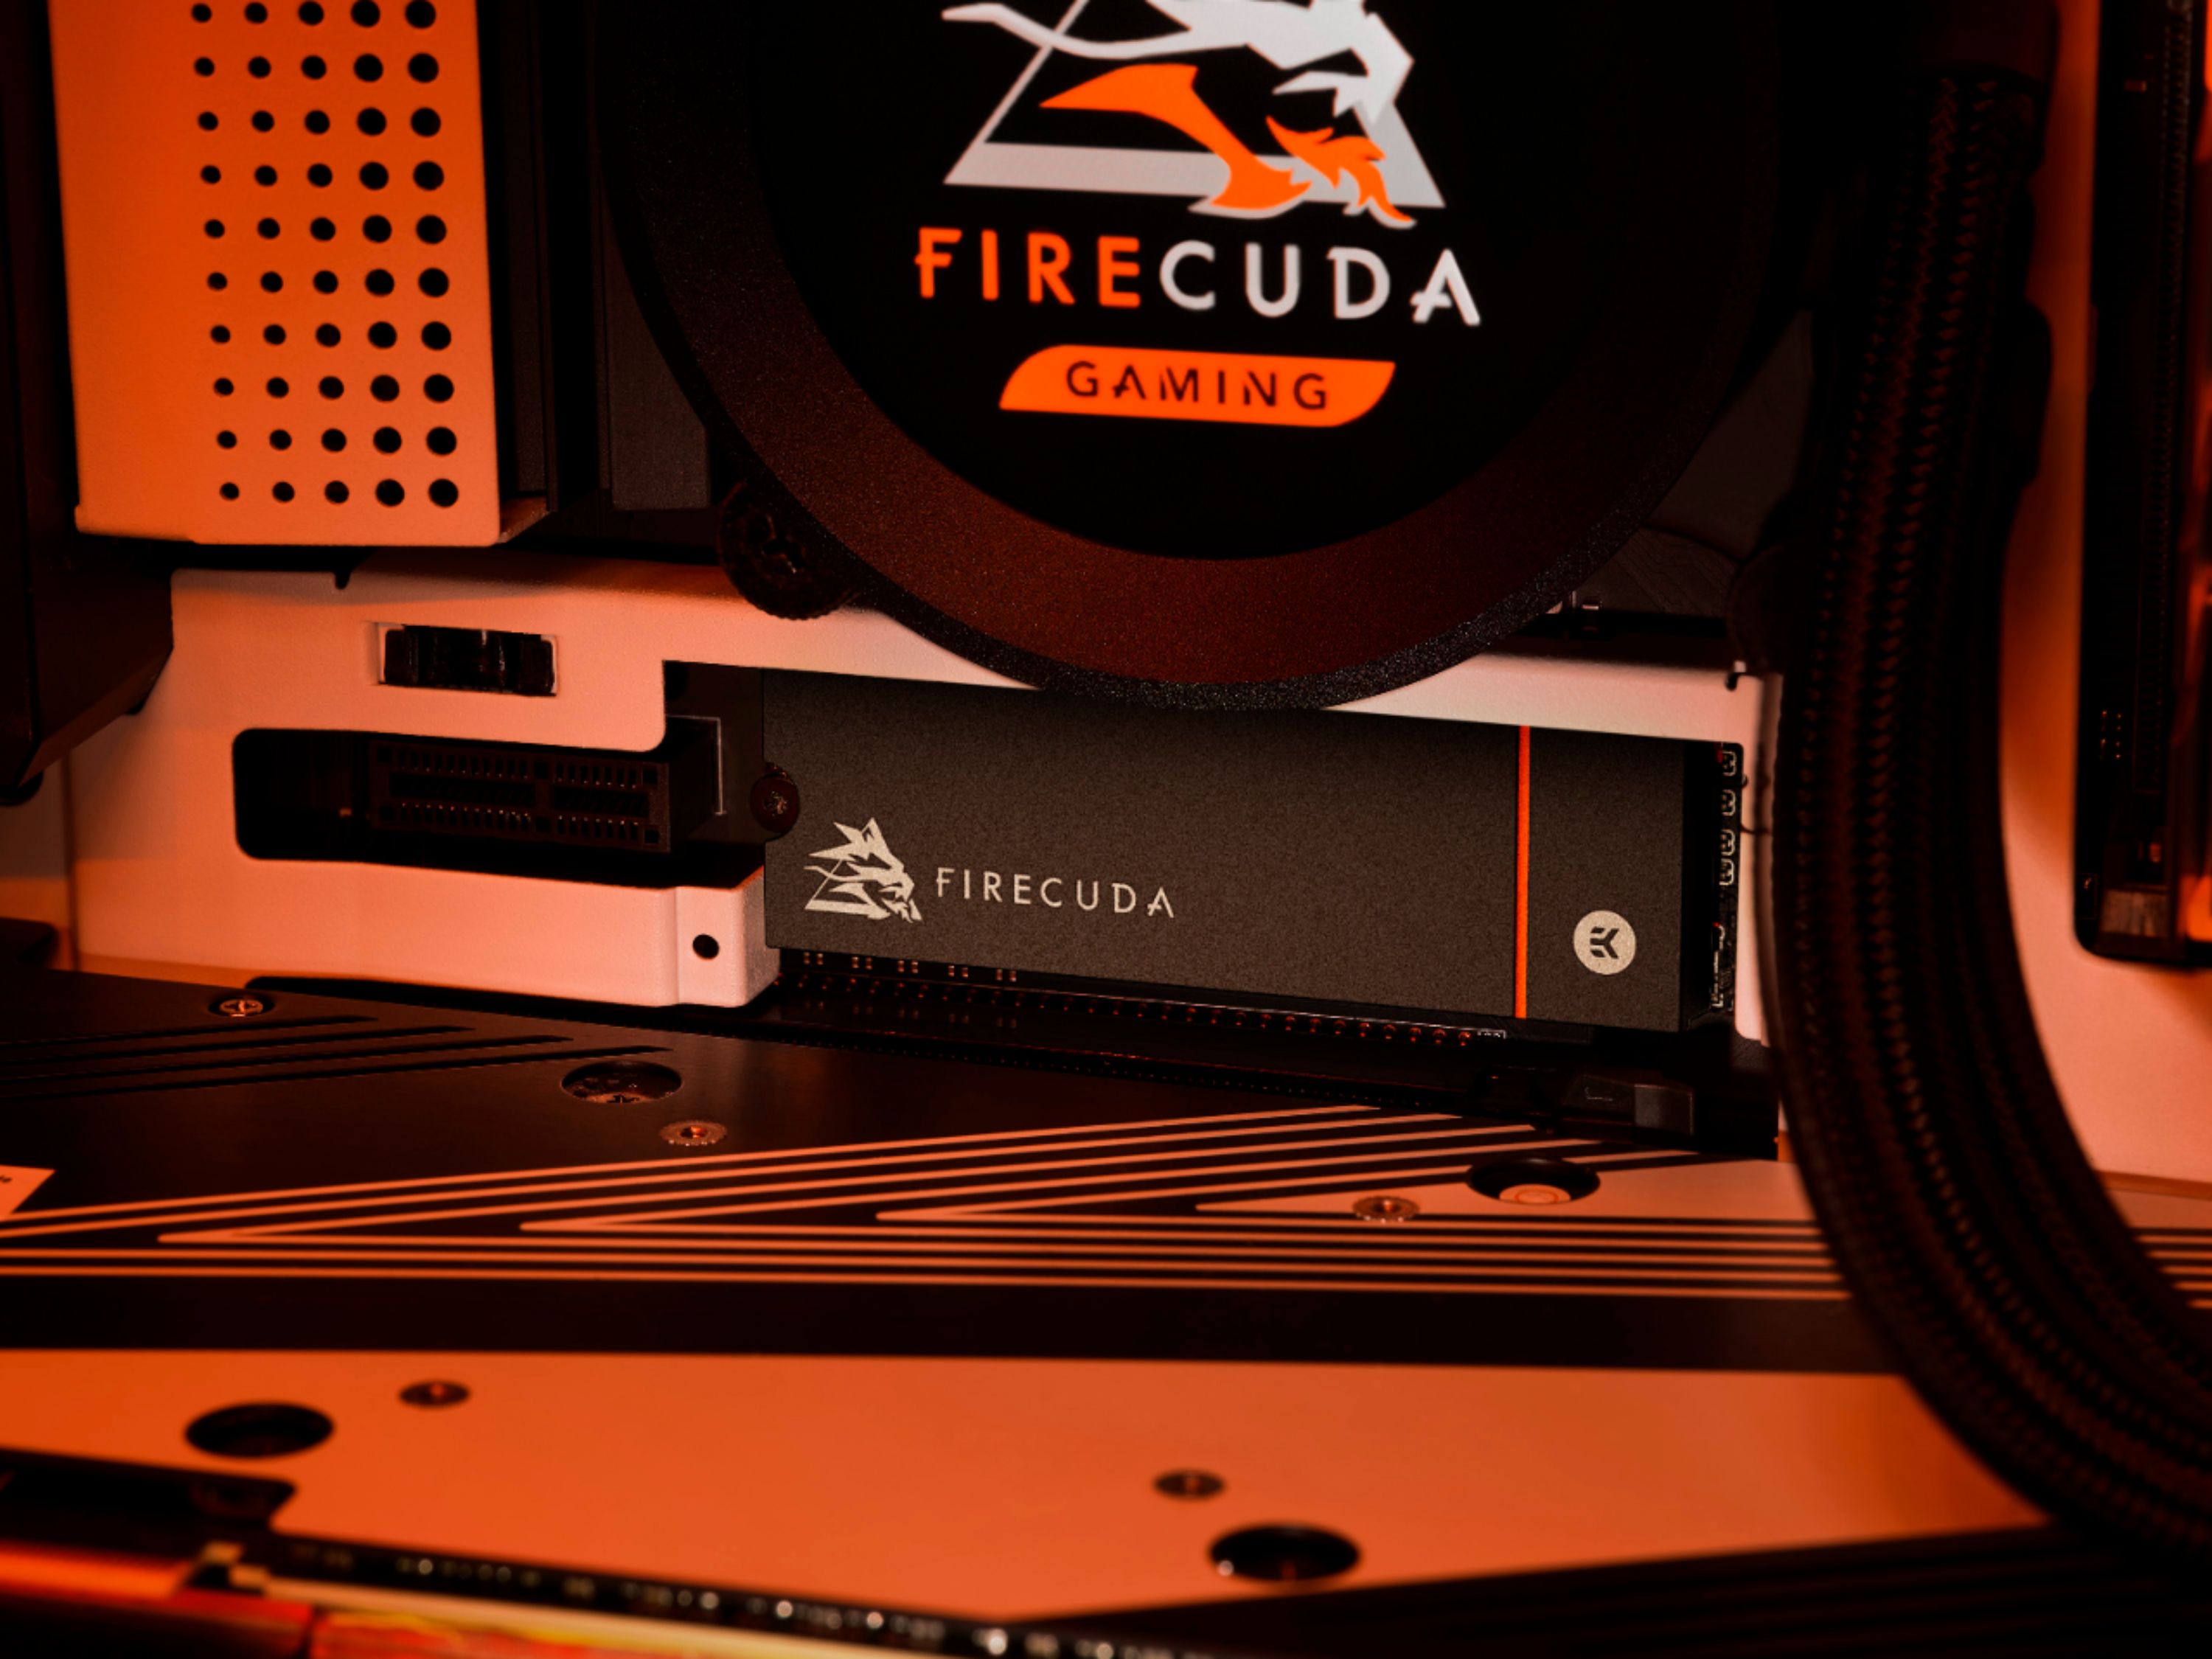 Seagate releases DirectStorage Firmware update for their FireCuda 530 SSD -  OC3D